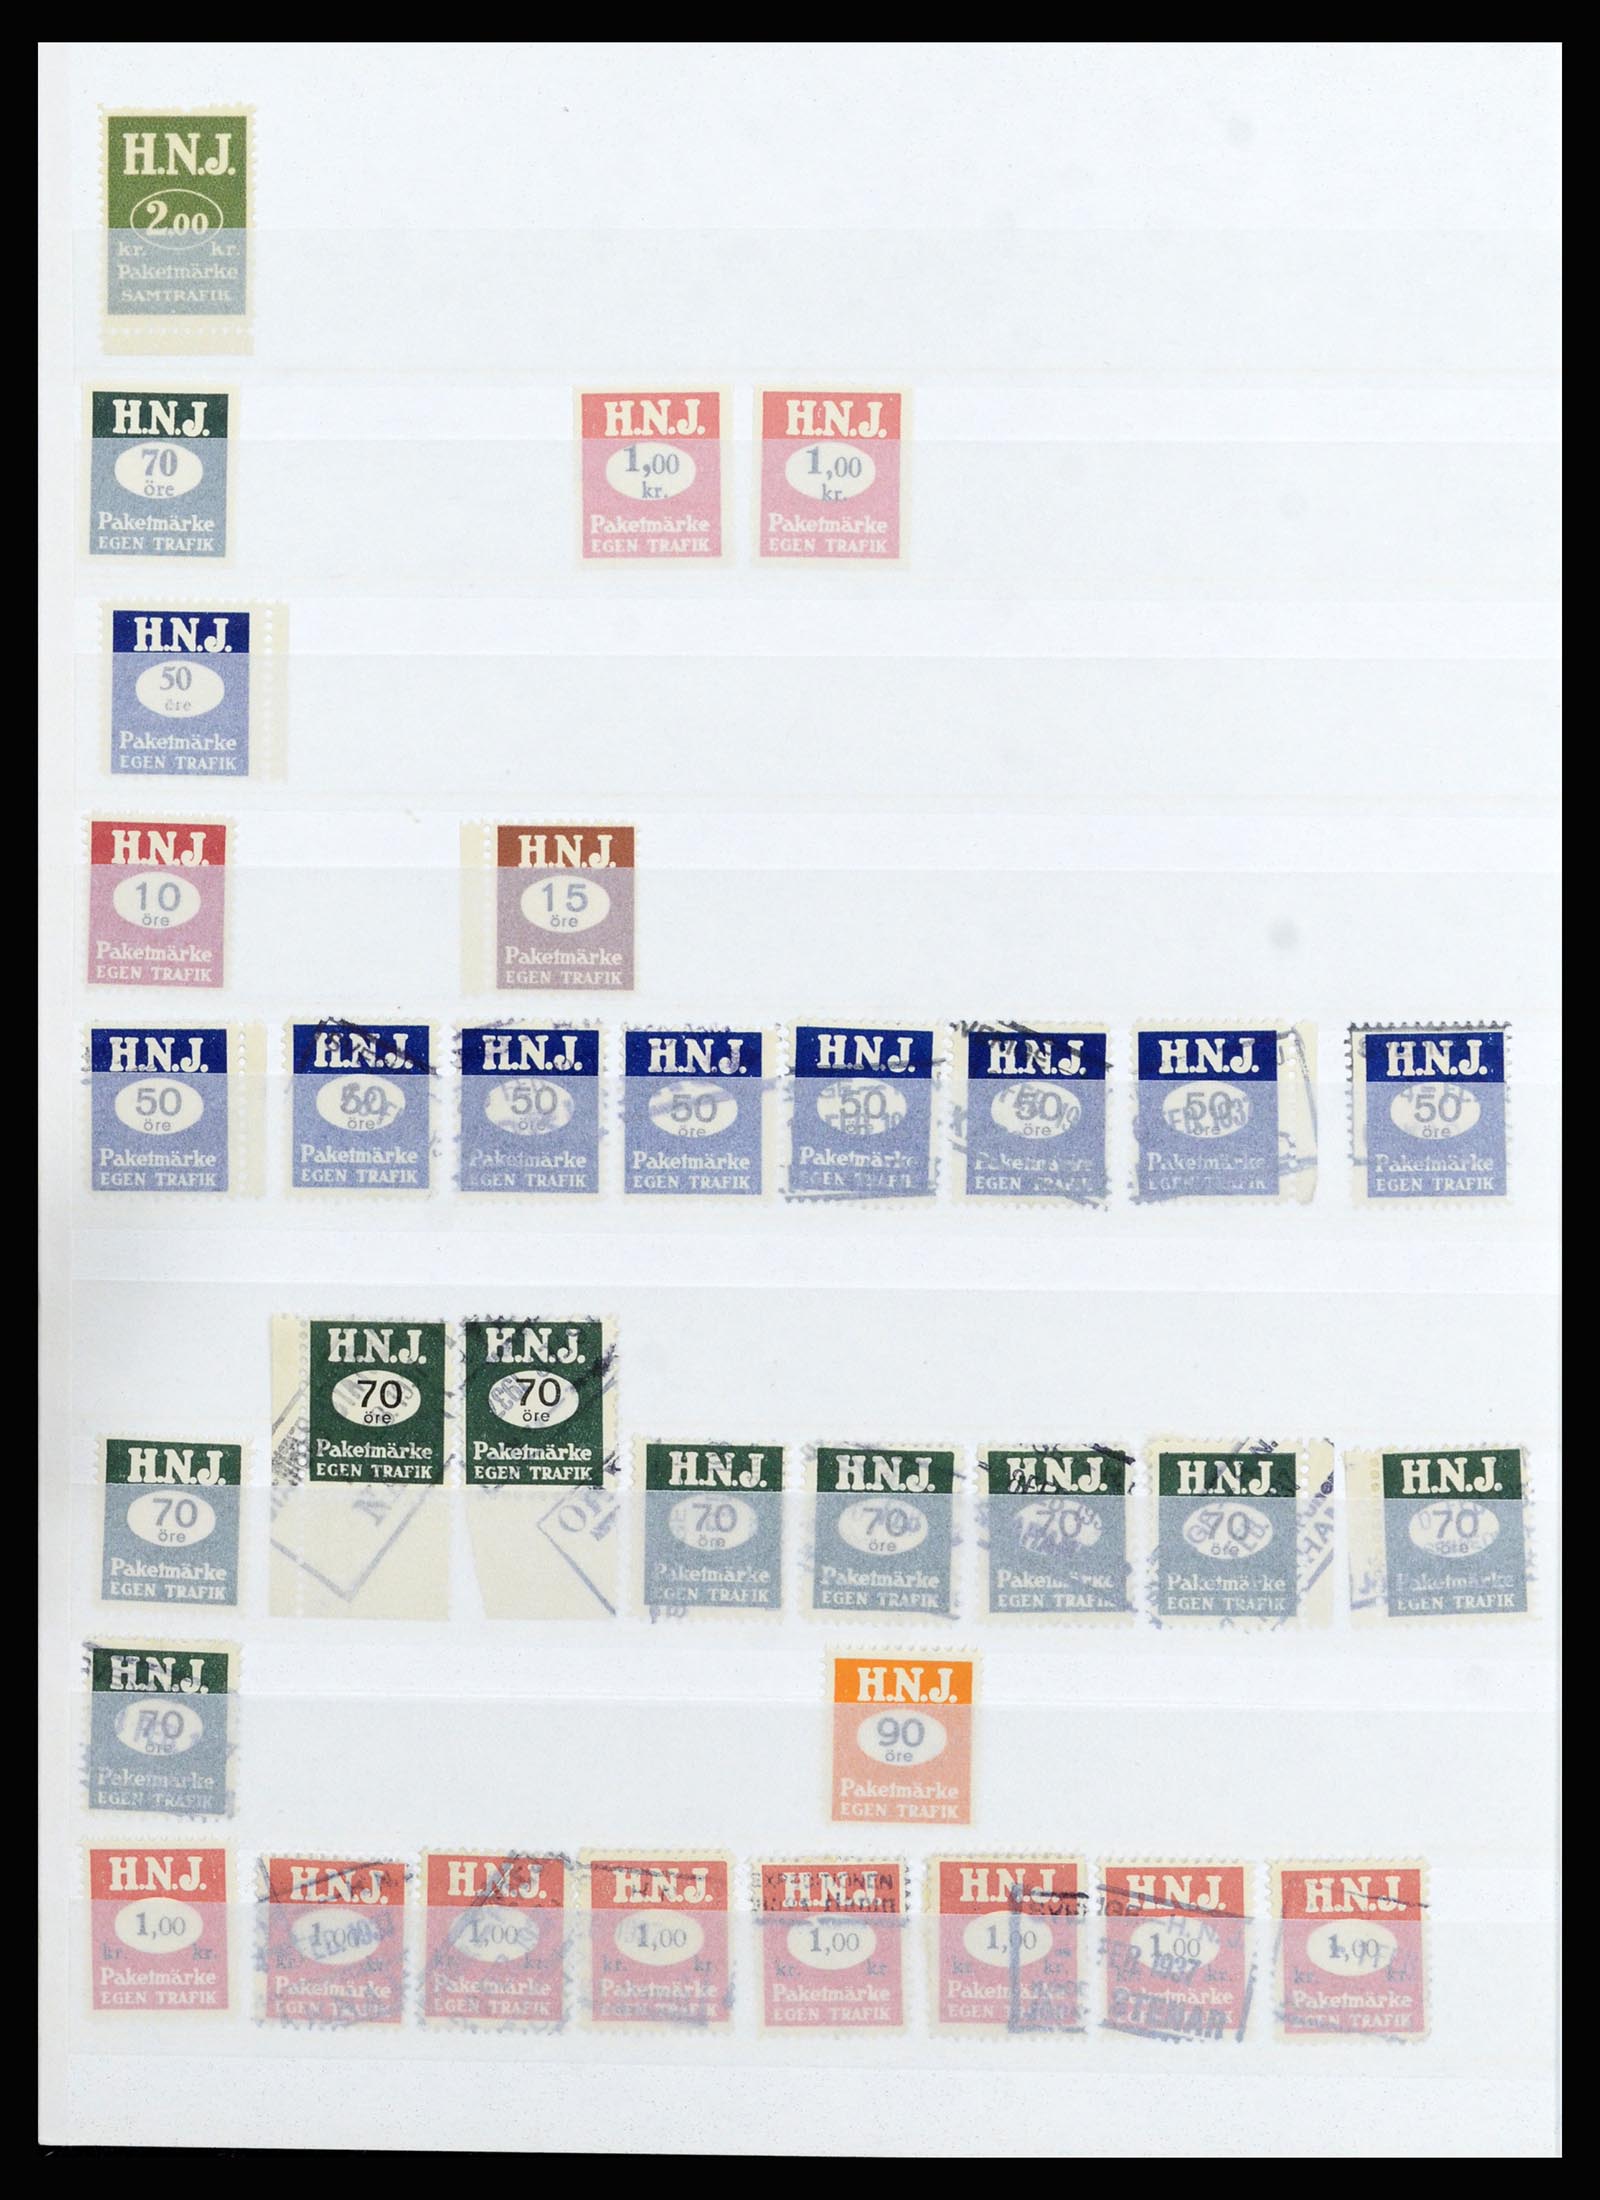 36981 008 - Stamp collection 36981 Scandinavia railroadstamps.